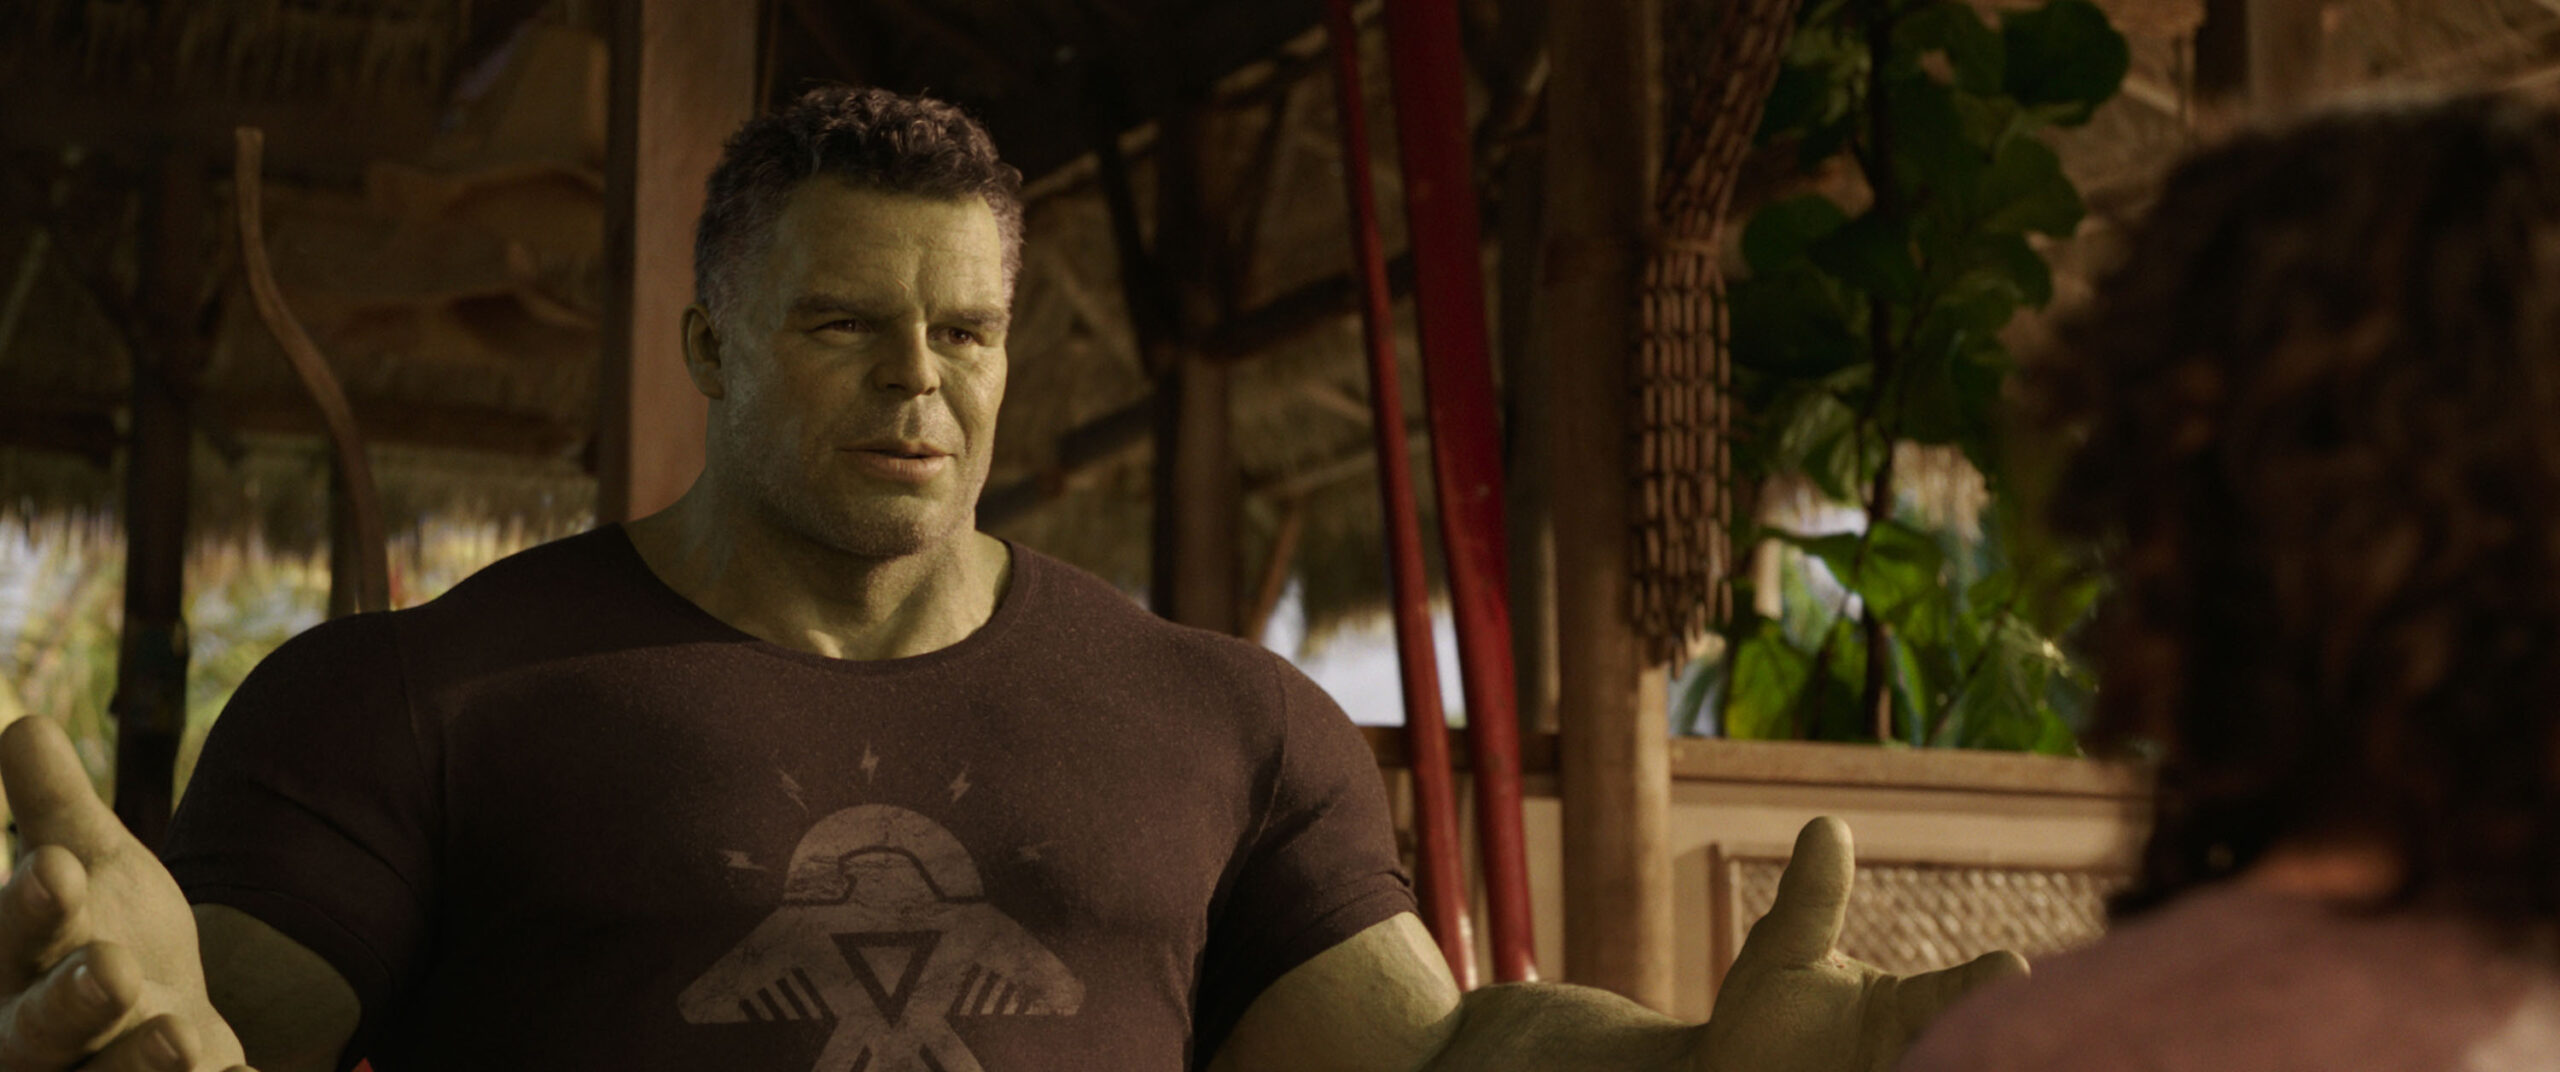 Mark Ruffalo come Smart Hulk / Bruce Banner in She-Hulk: Attorney at Law 1x01 [tag: Mark Ruffalo] [credit: Copyright Marvel Studios 2022. All Rights Reserved; courtesy of Marvel Studios]